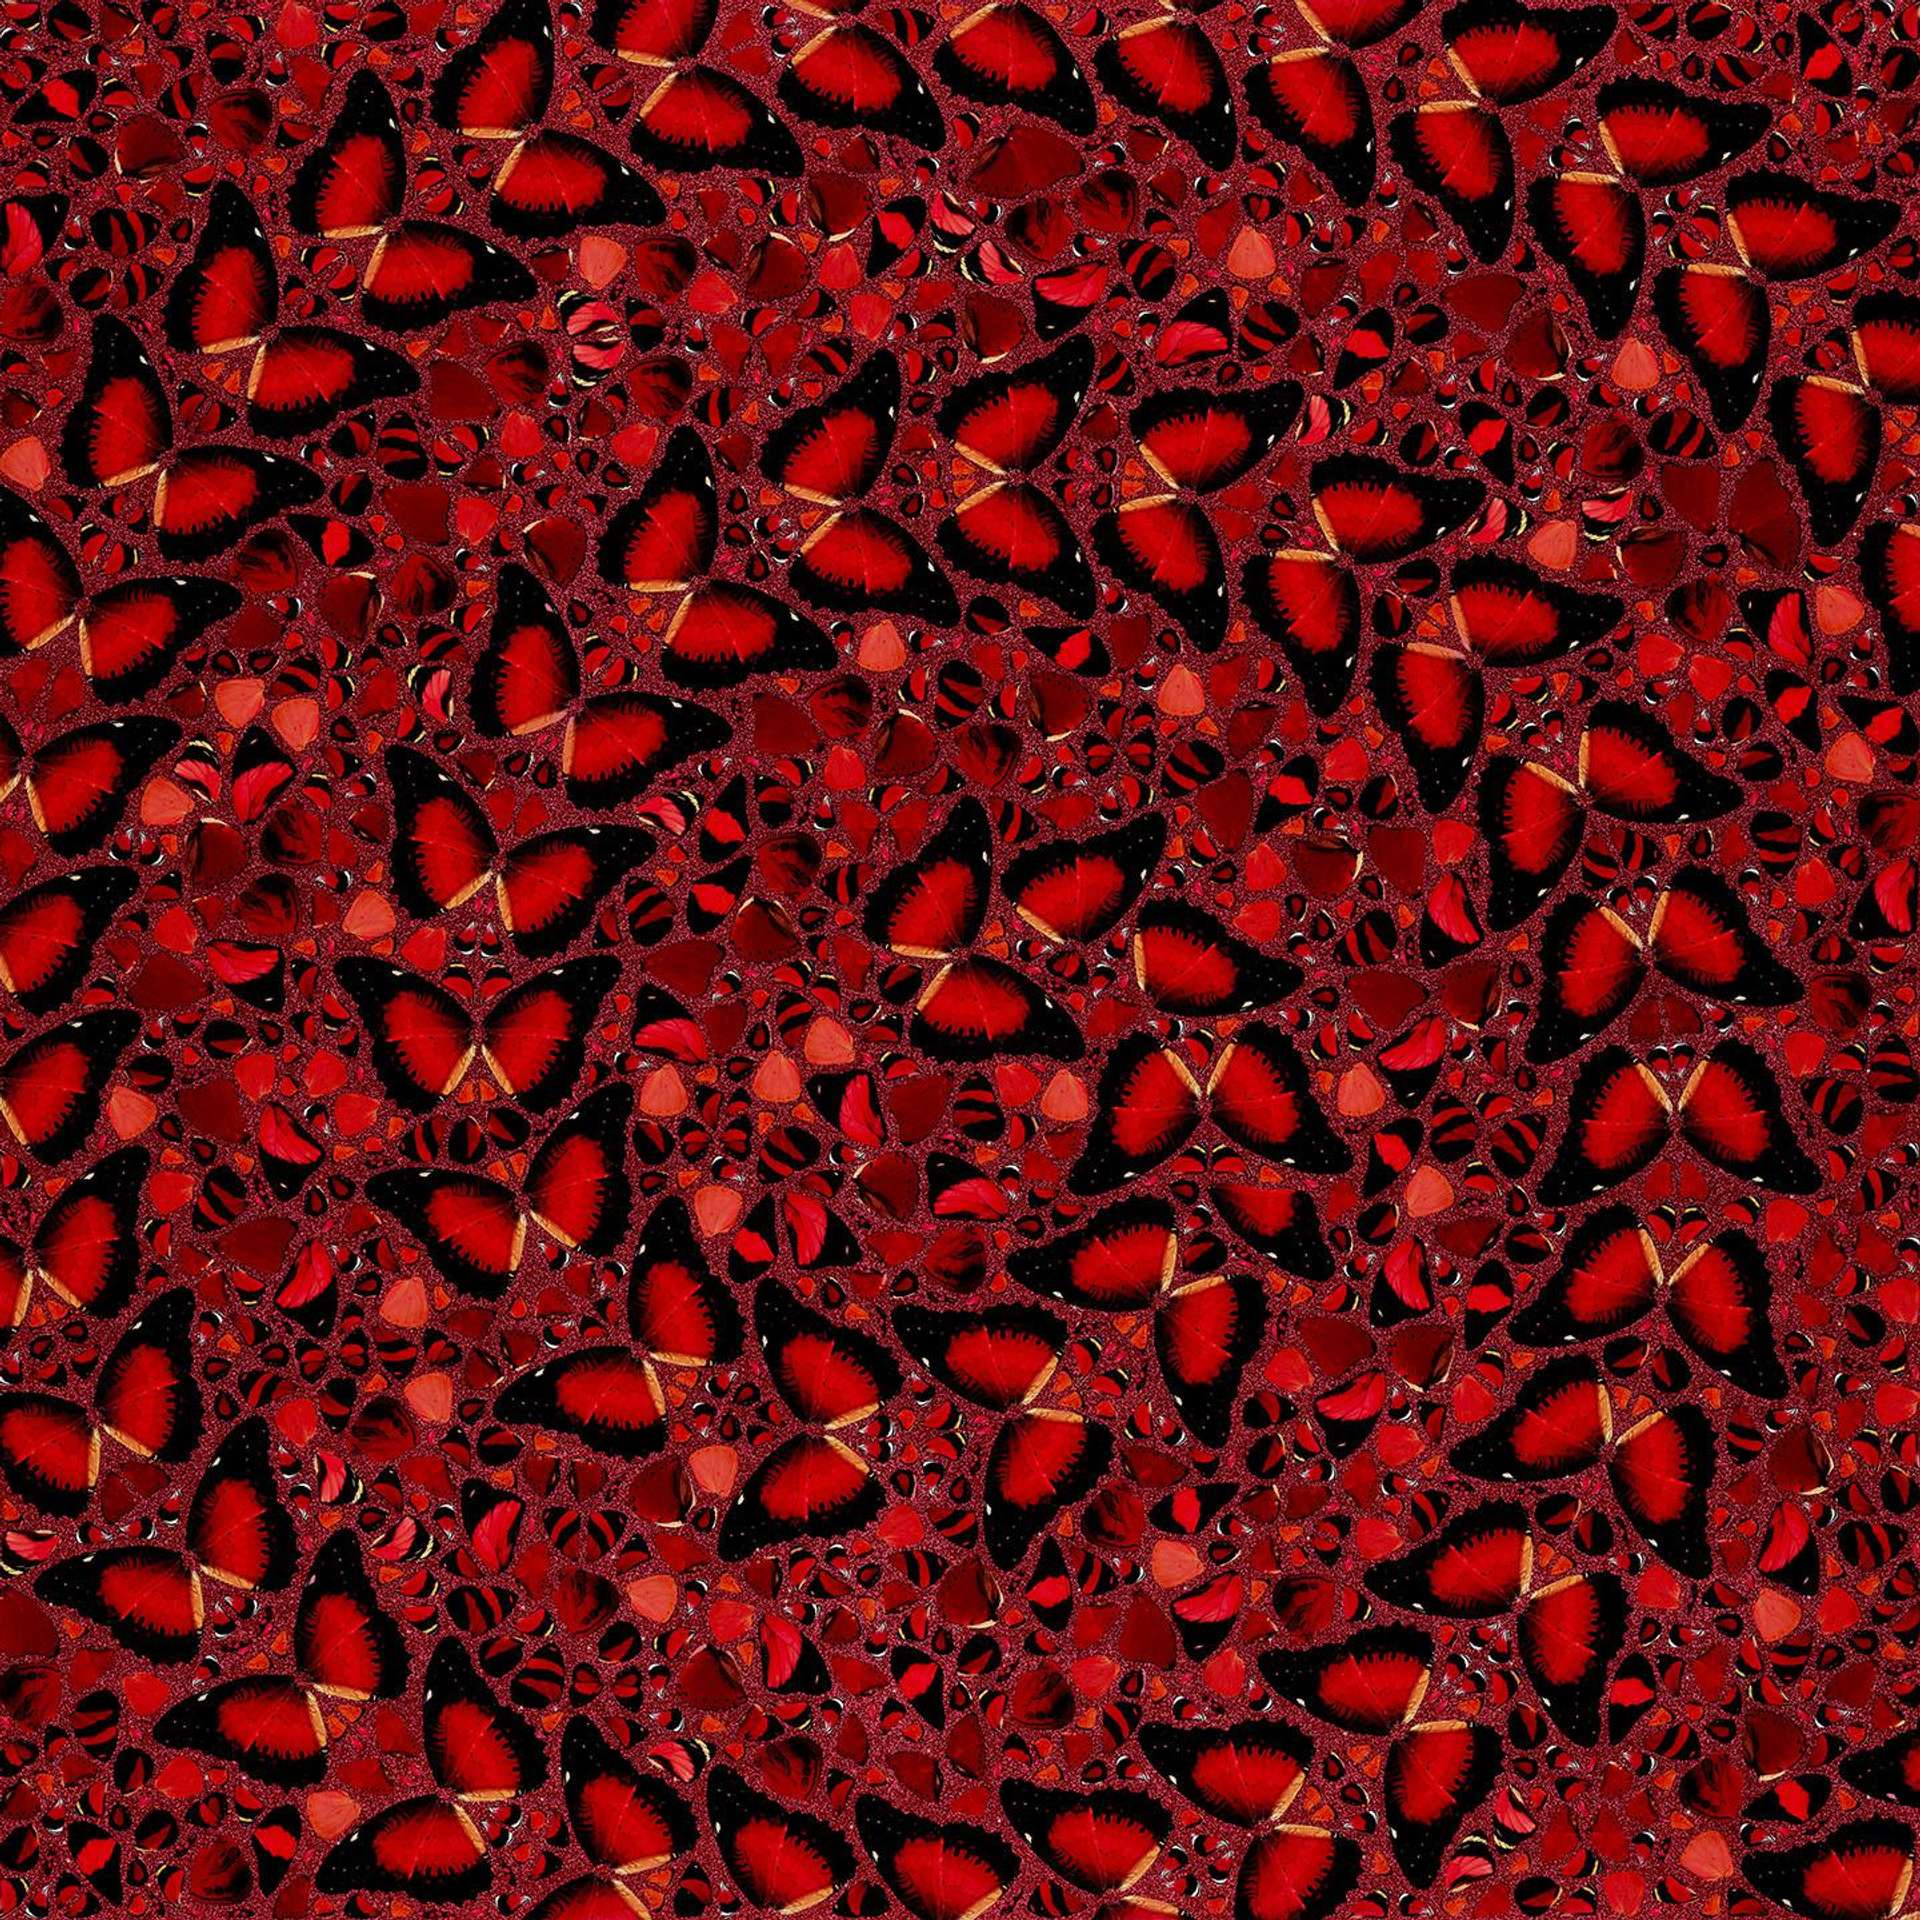 Damien Hirst’s H10-5 Taytu Betul. A giclée print of a red, spiral, kaleidoscopic pattern of red and black butterflies. 